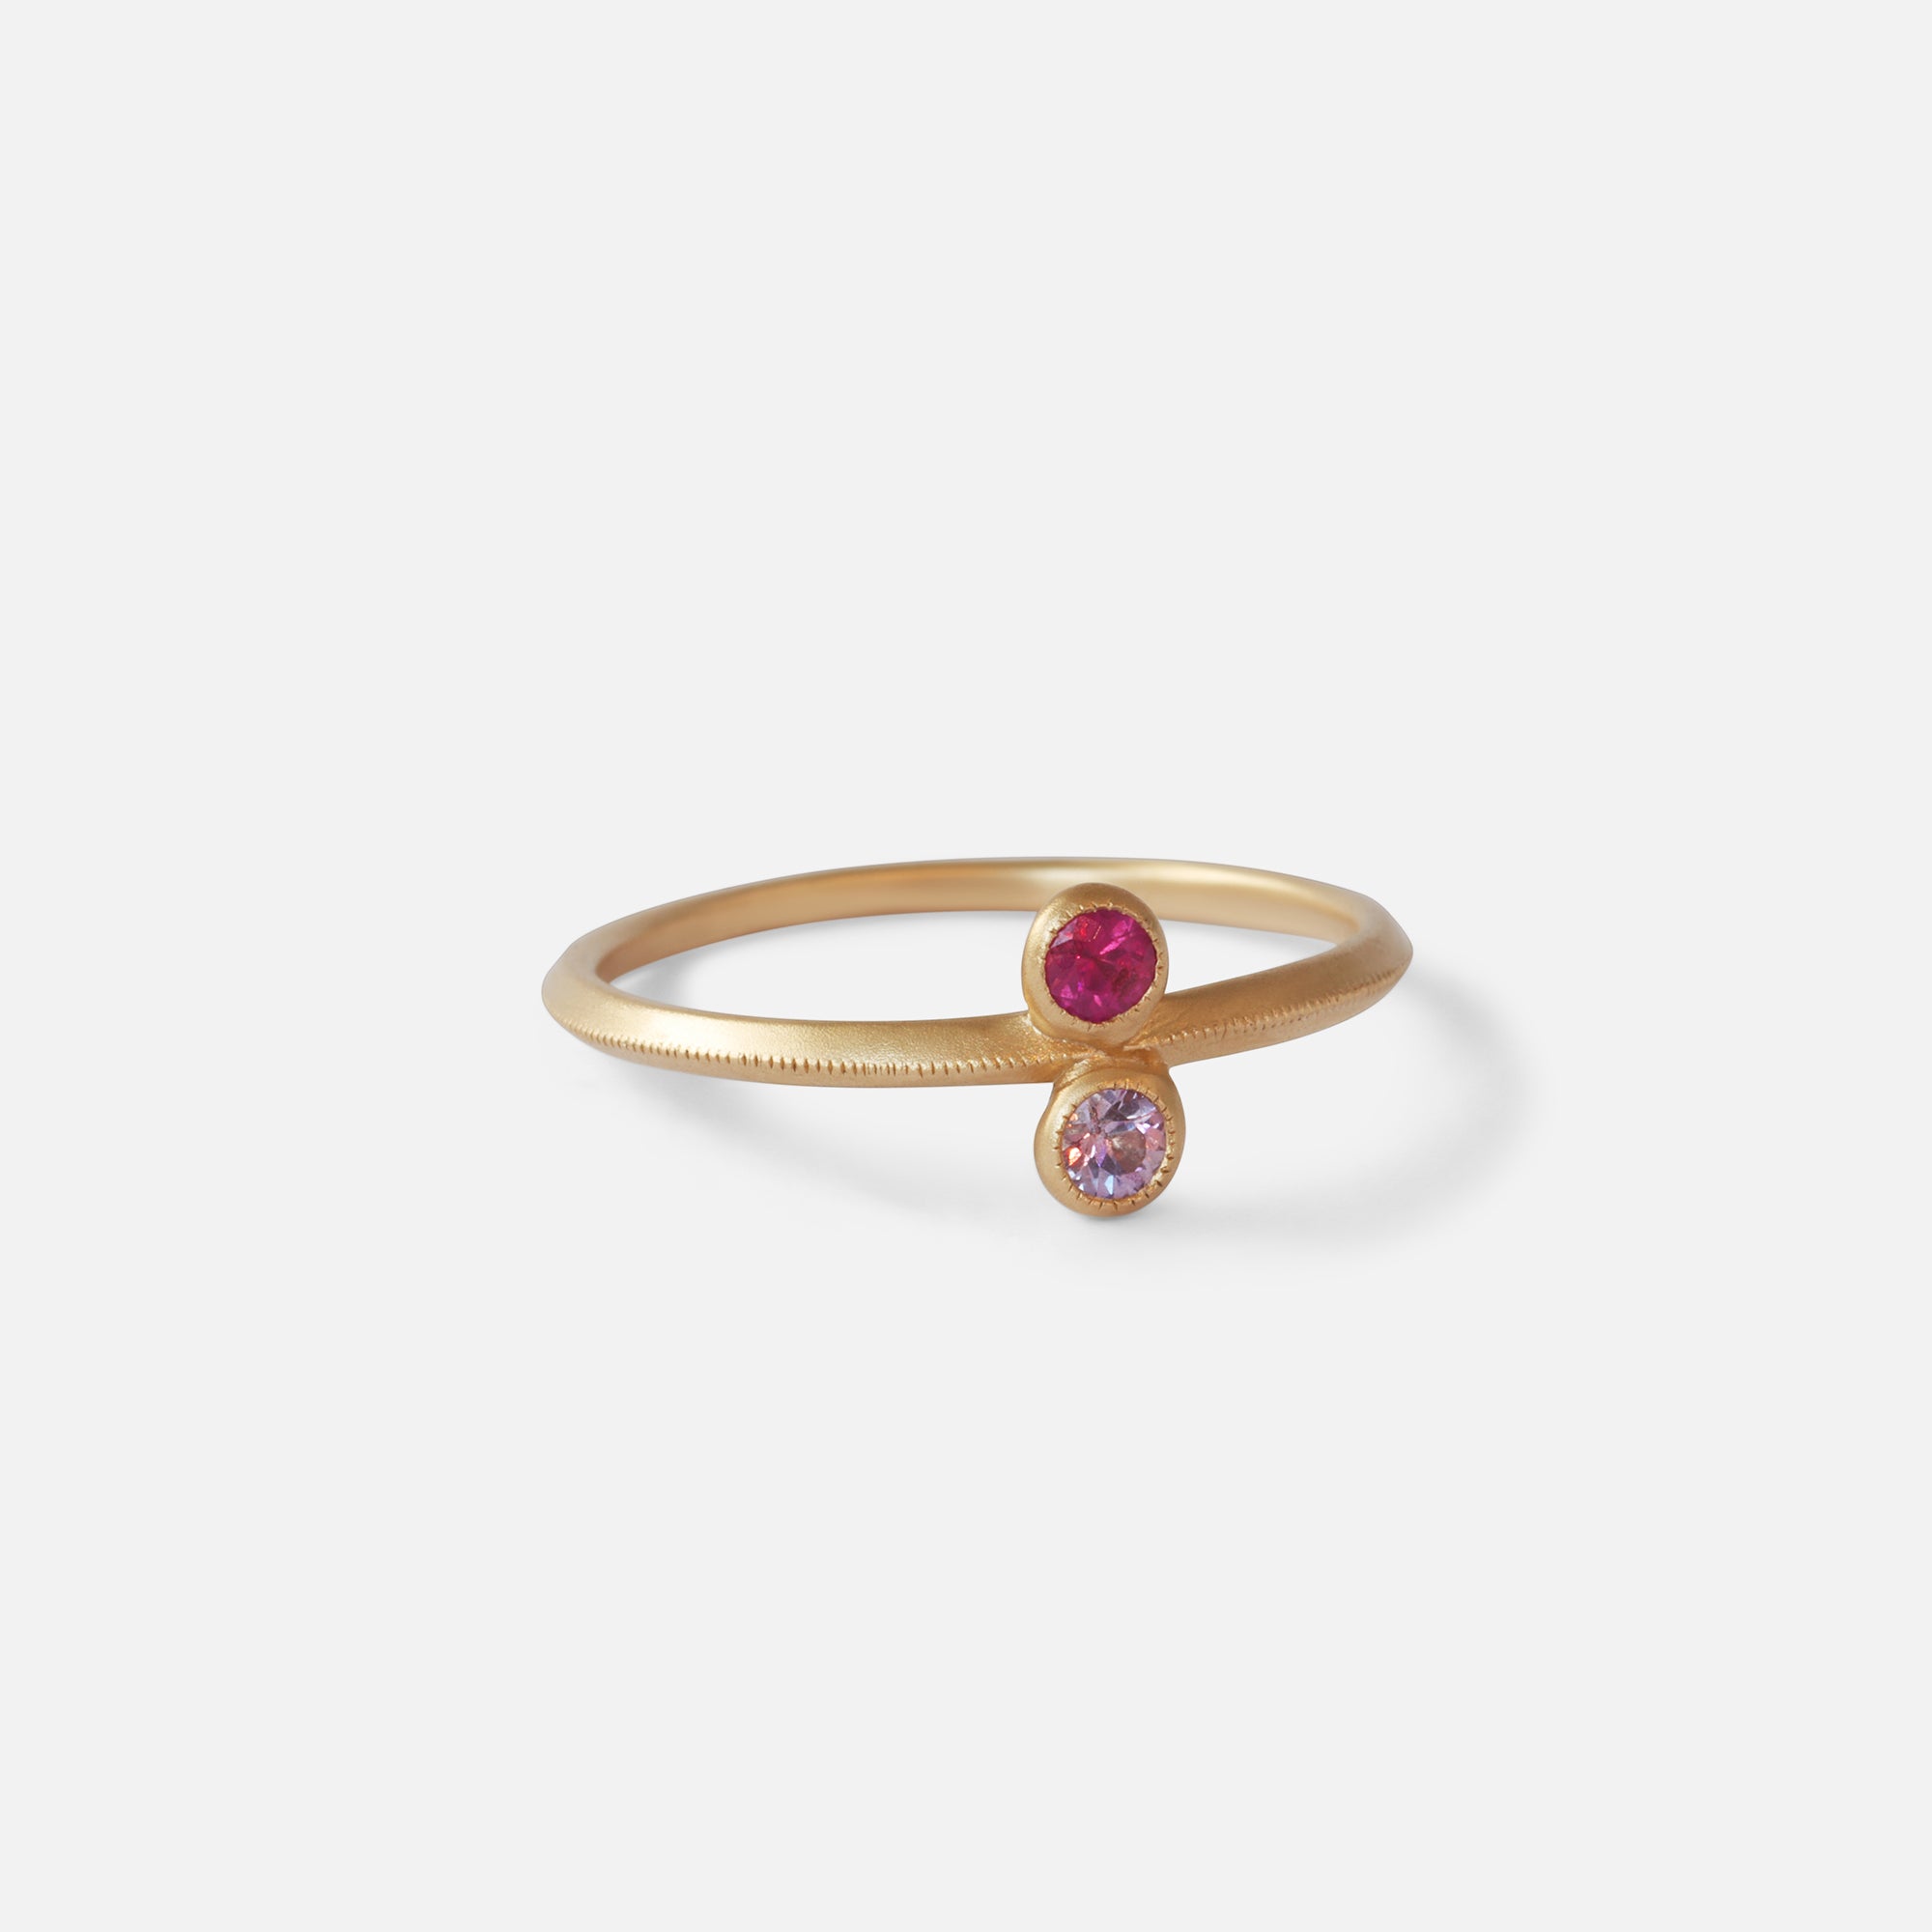 Melee Ball / Toi et Moi / Ruby and Pink Sapphire Ring By fitzgerald jewelry in rings Category